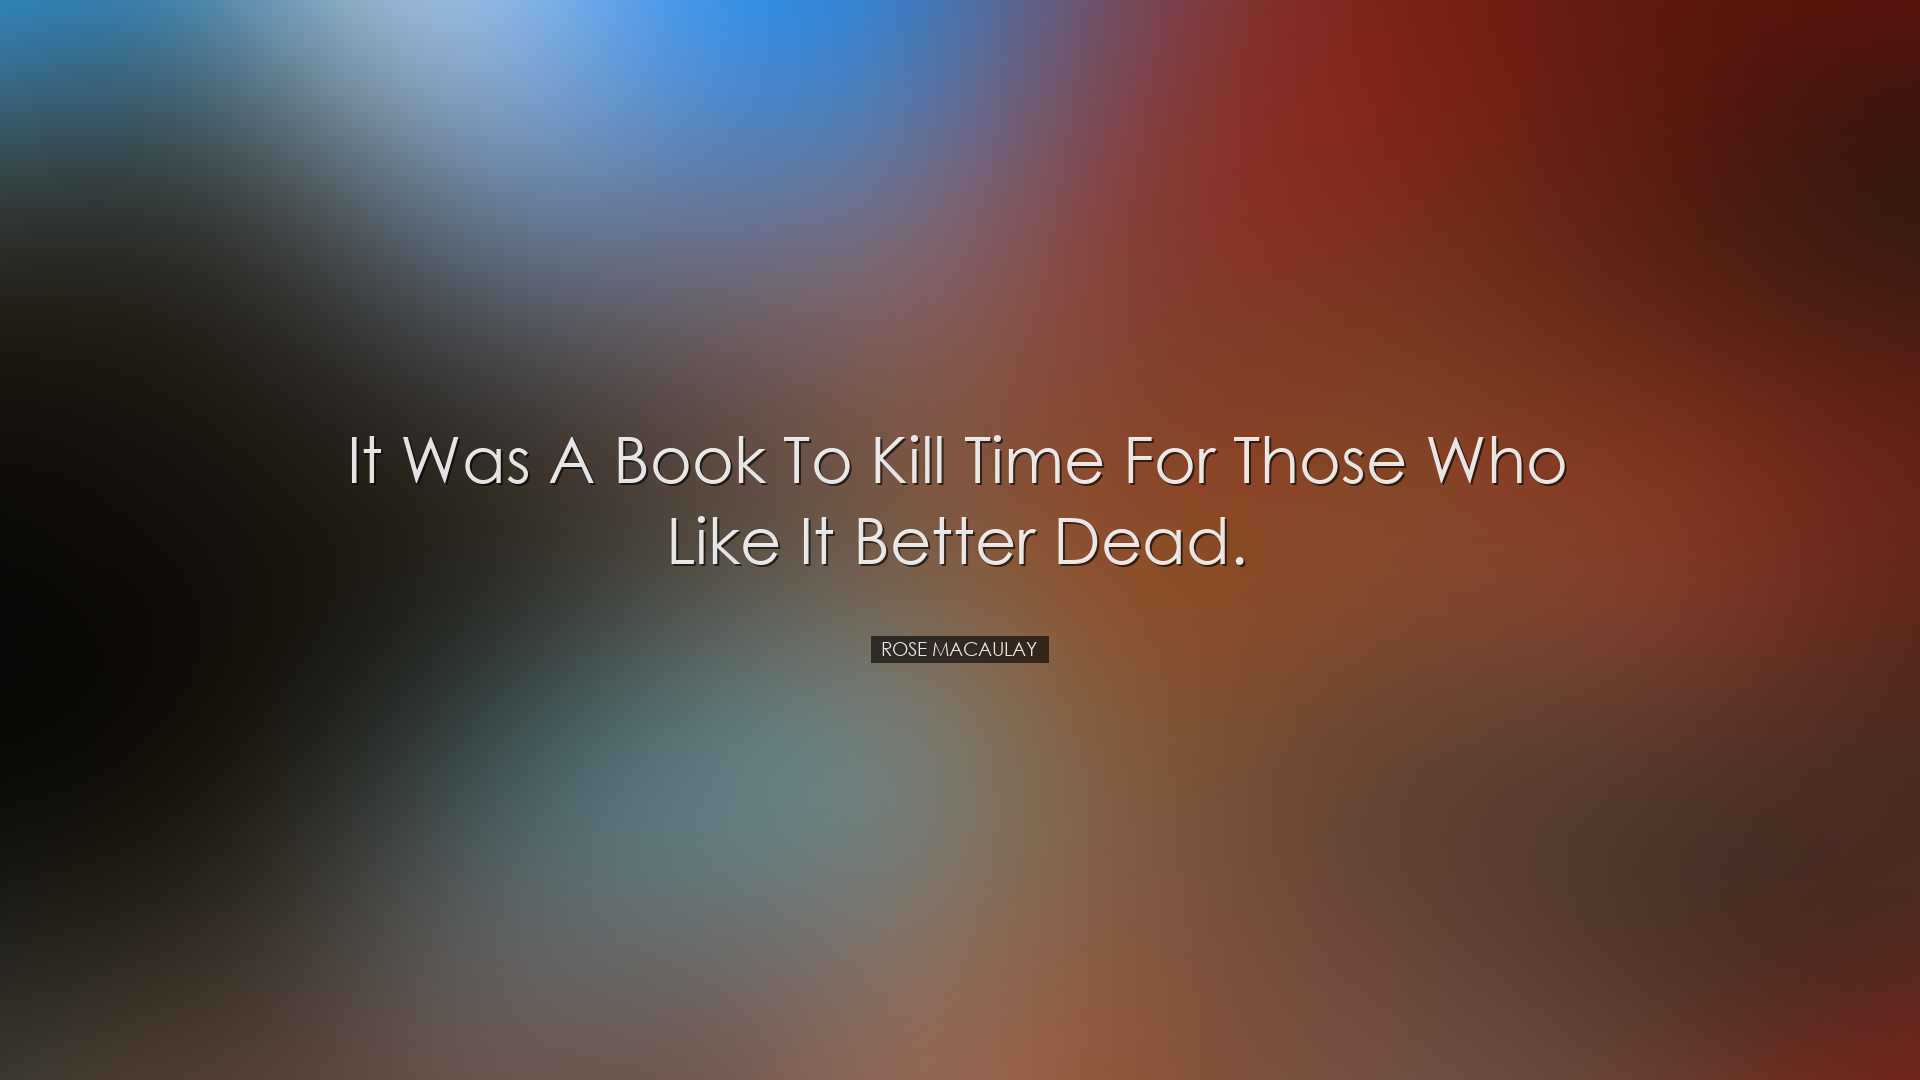 It was a book to kill time for those who like it better dead. - Ro